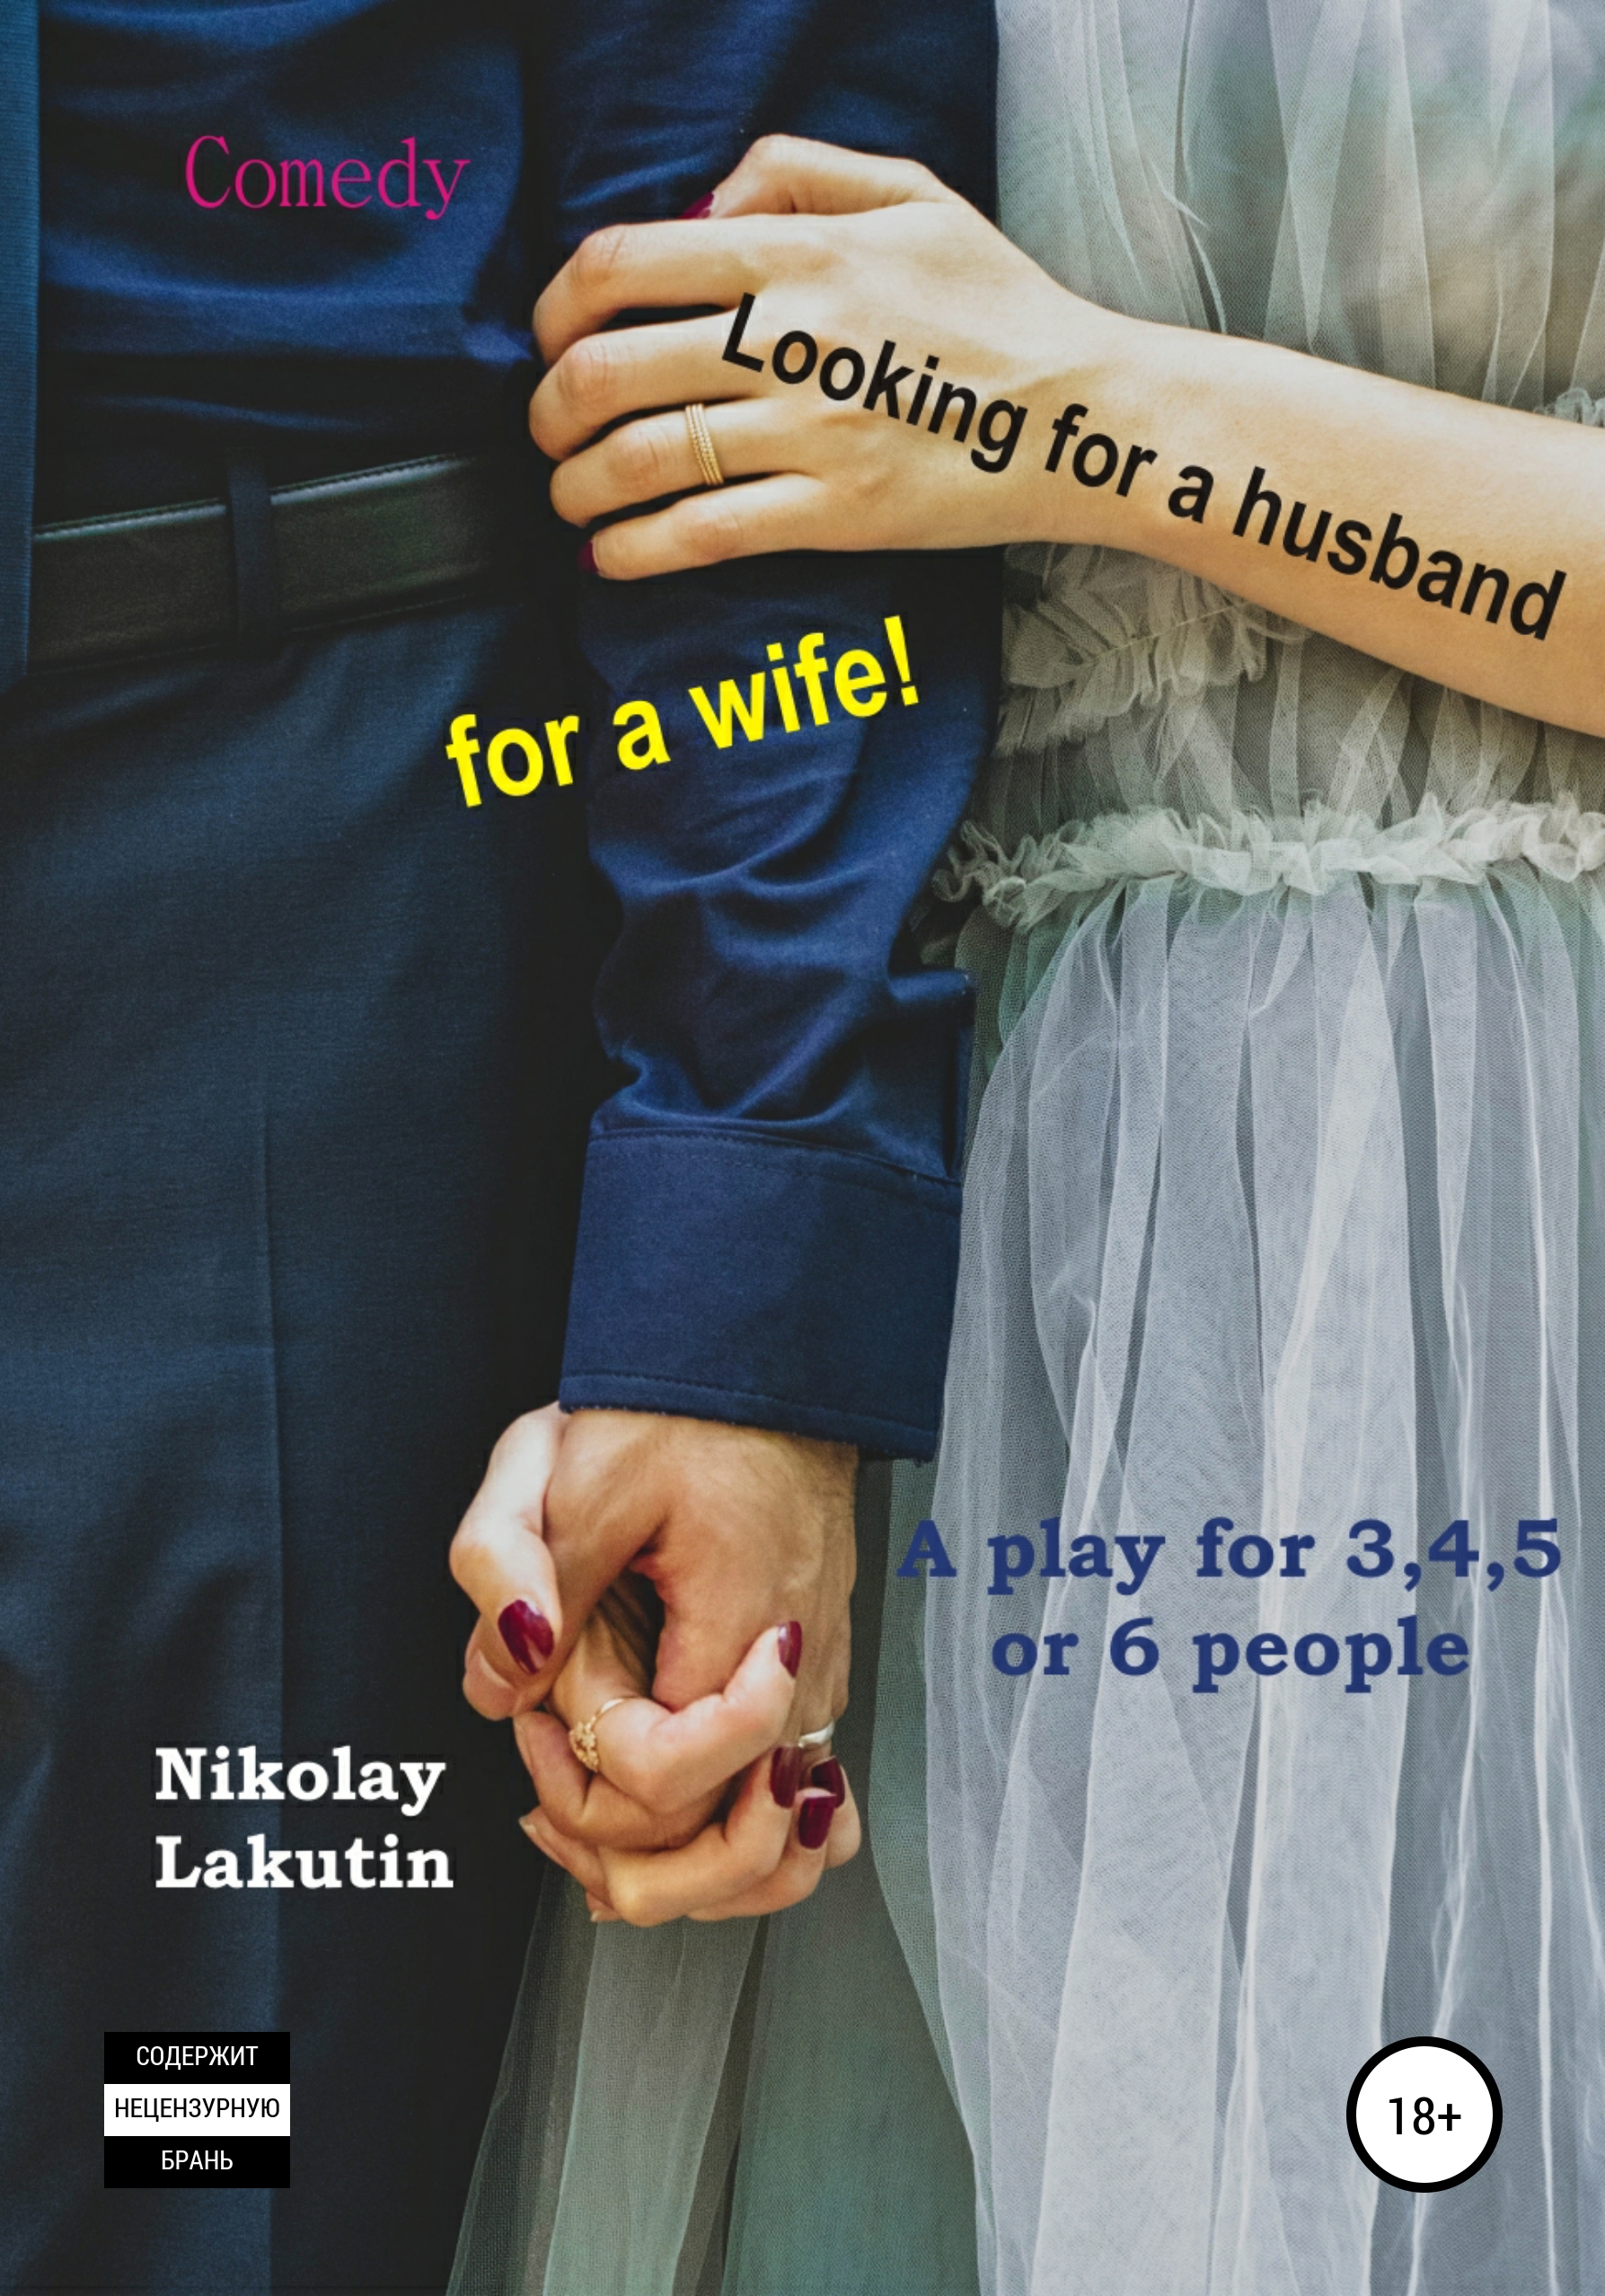 A play for 3,4,5 or 6 people. Looking for a husband for a wife! Comedy